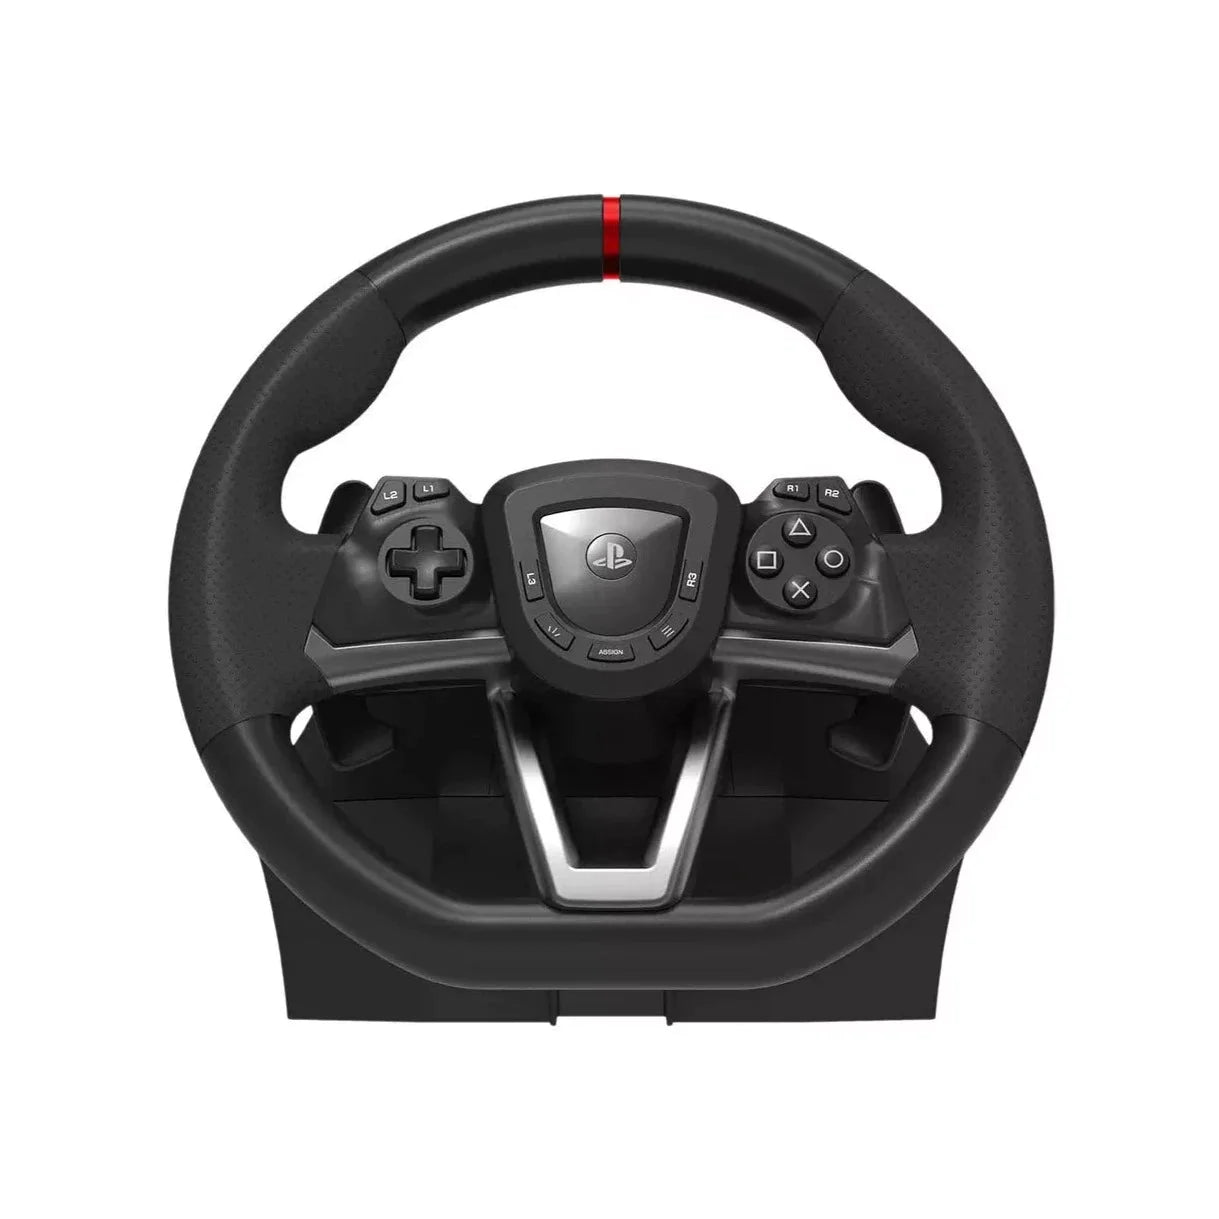 Hori Apex Steering Wheel and Pedals for PS5, PS4 & PC (SPF-004U) - New